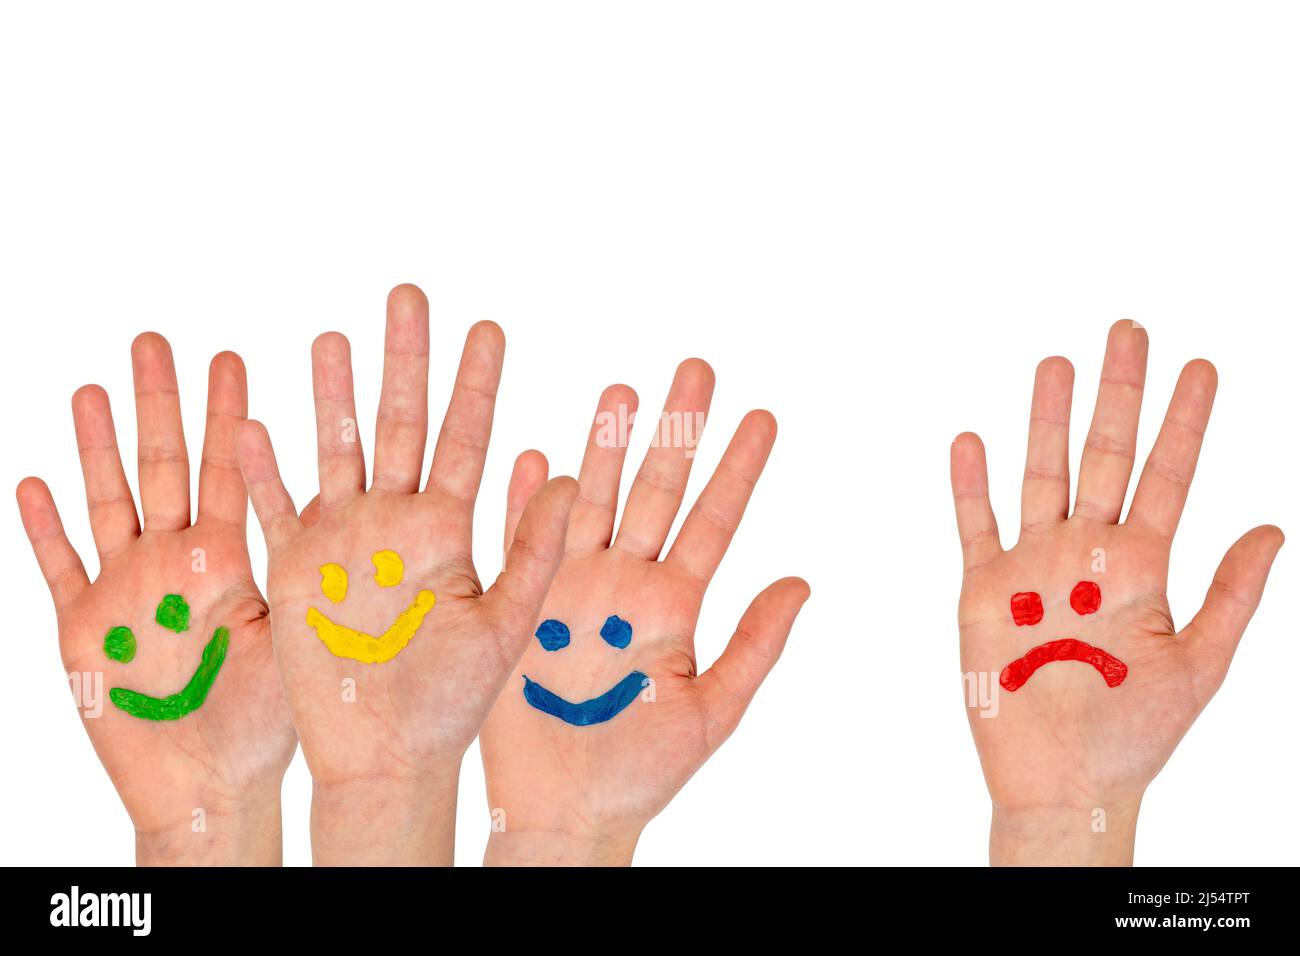 Hands with smiles and sadness pattern. Smiling and sad painted face reactions . Stock Photo